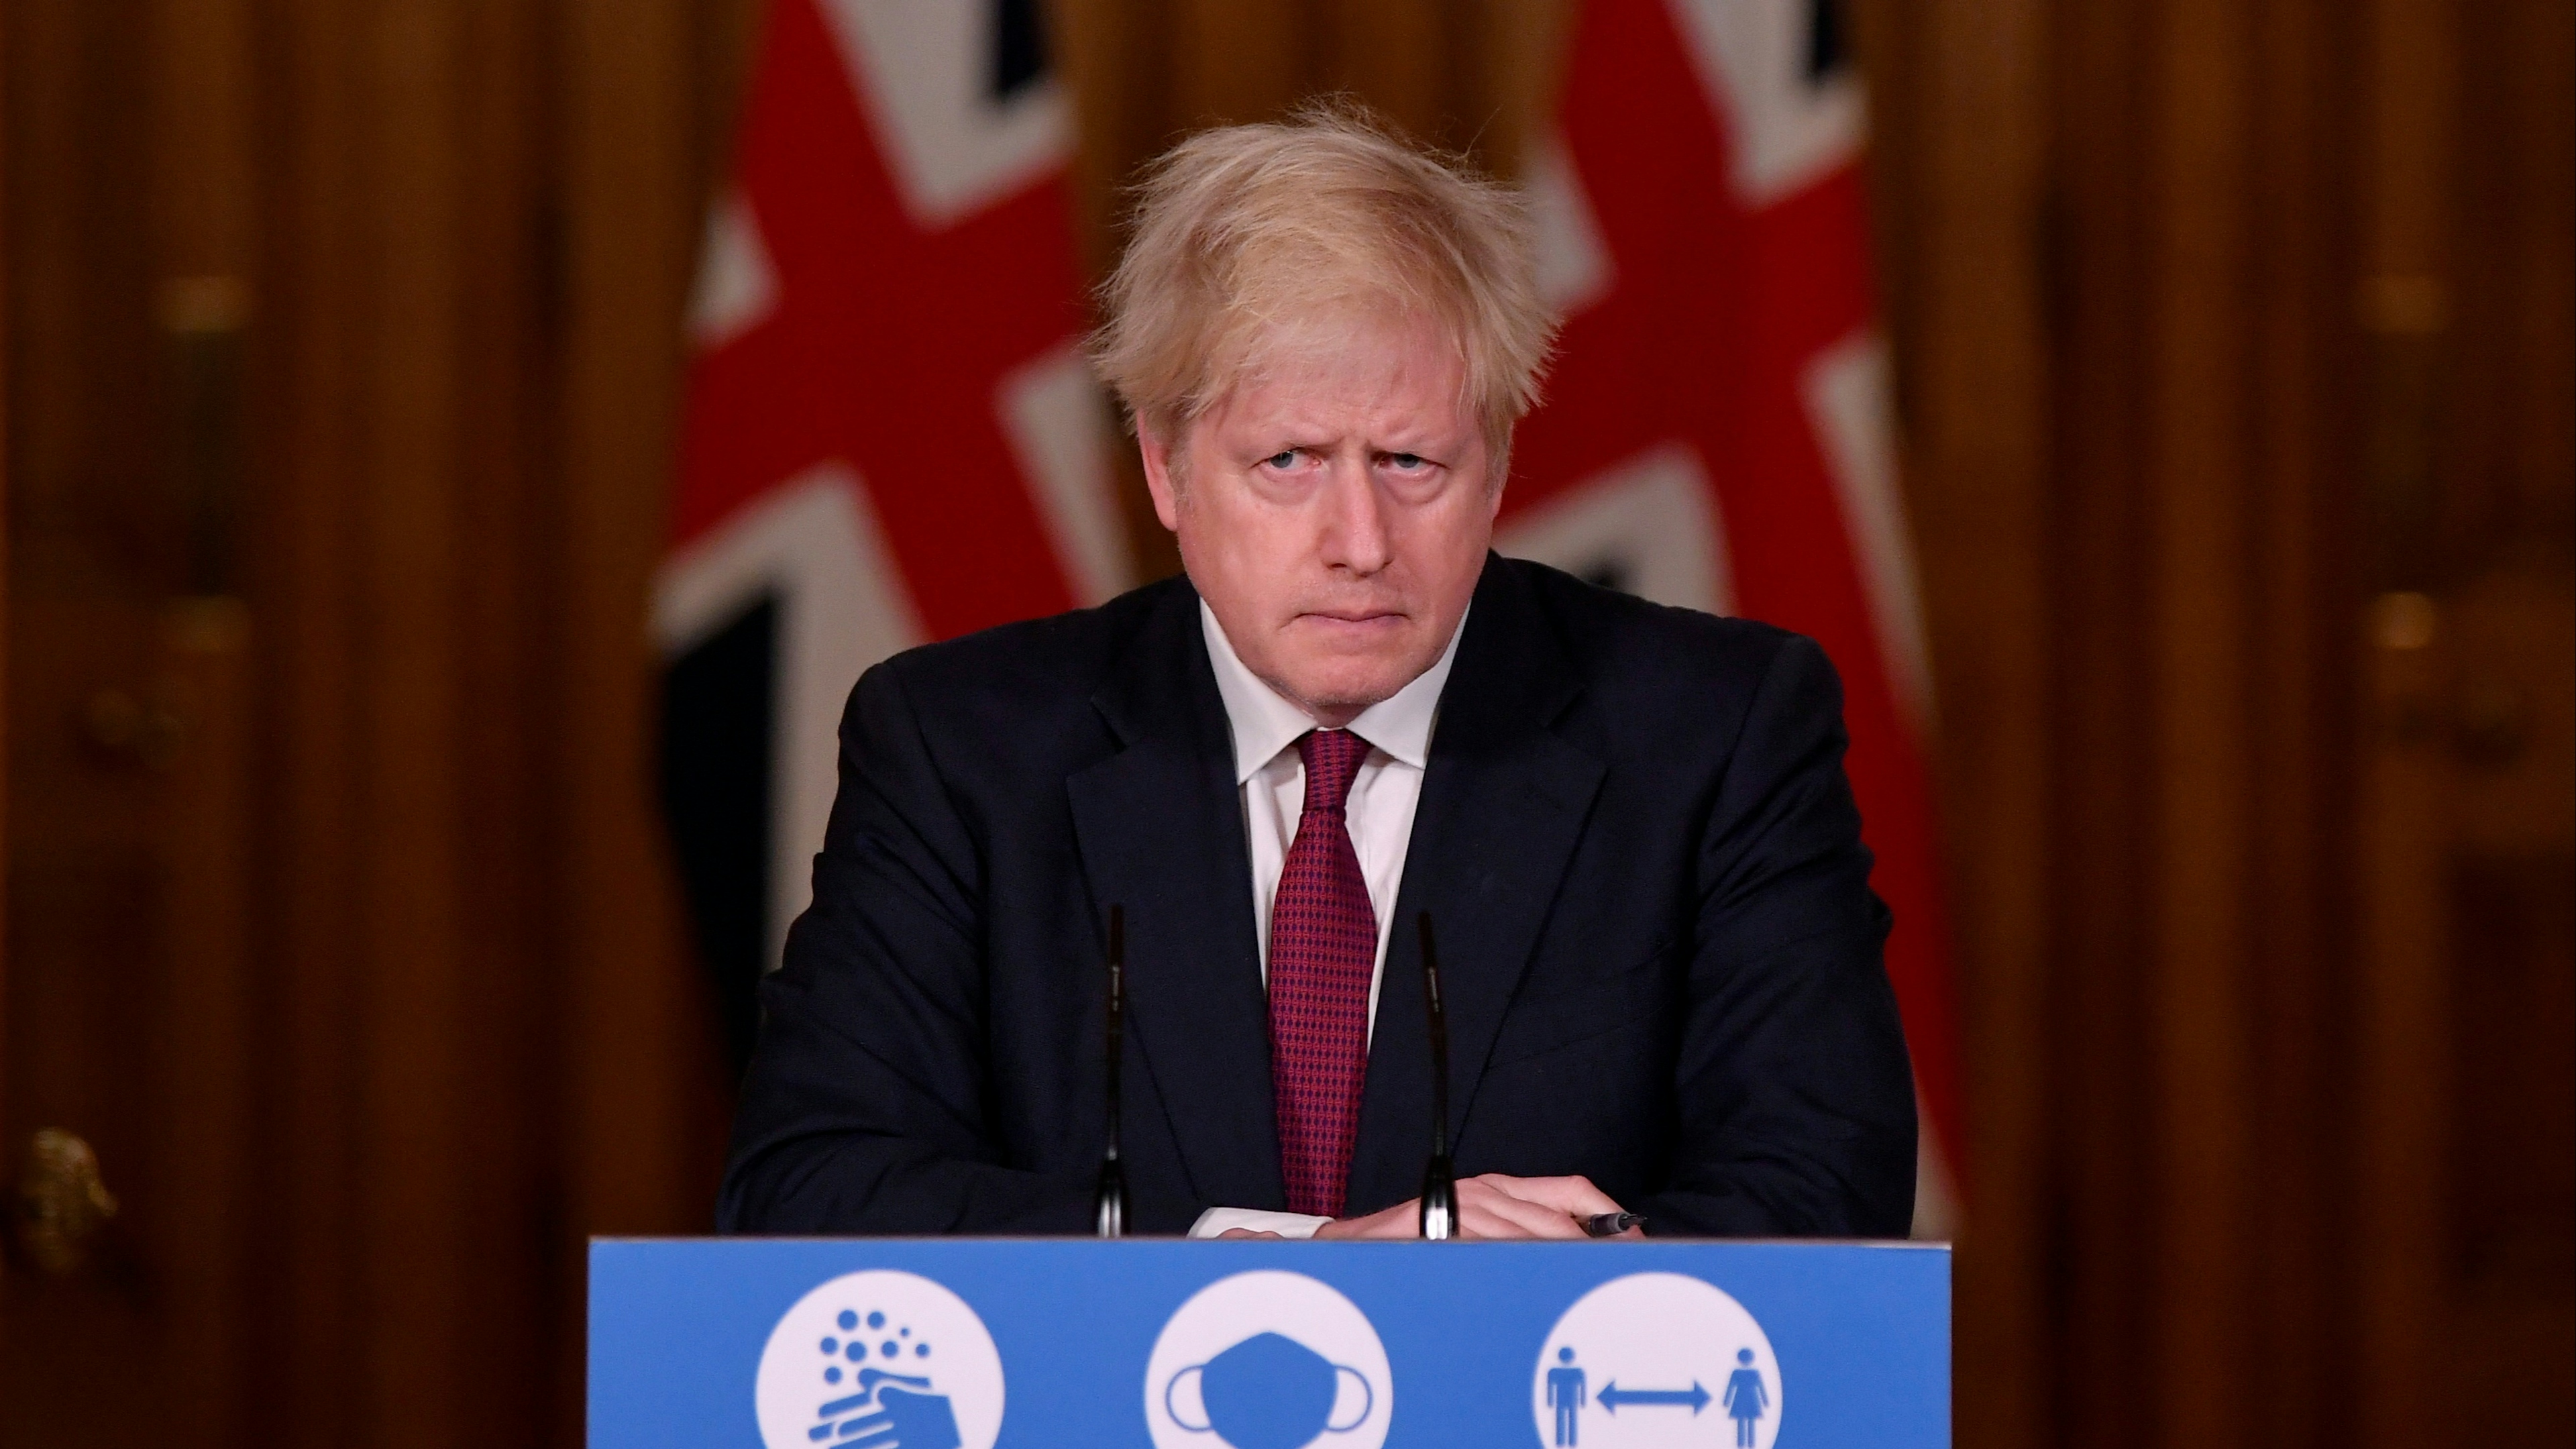 Britain's Prime Minister Boris Johnson speaks during a news conference in response to the ongoing situation with the coronavirus disease (COVID-19) pandemic.